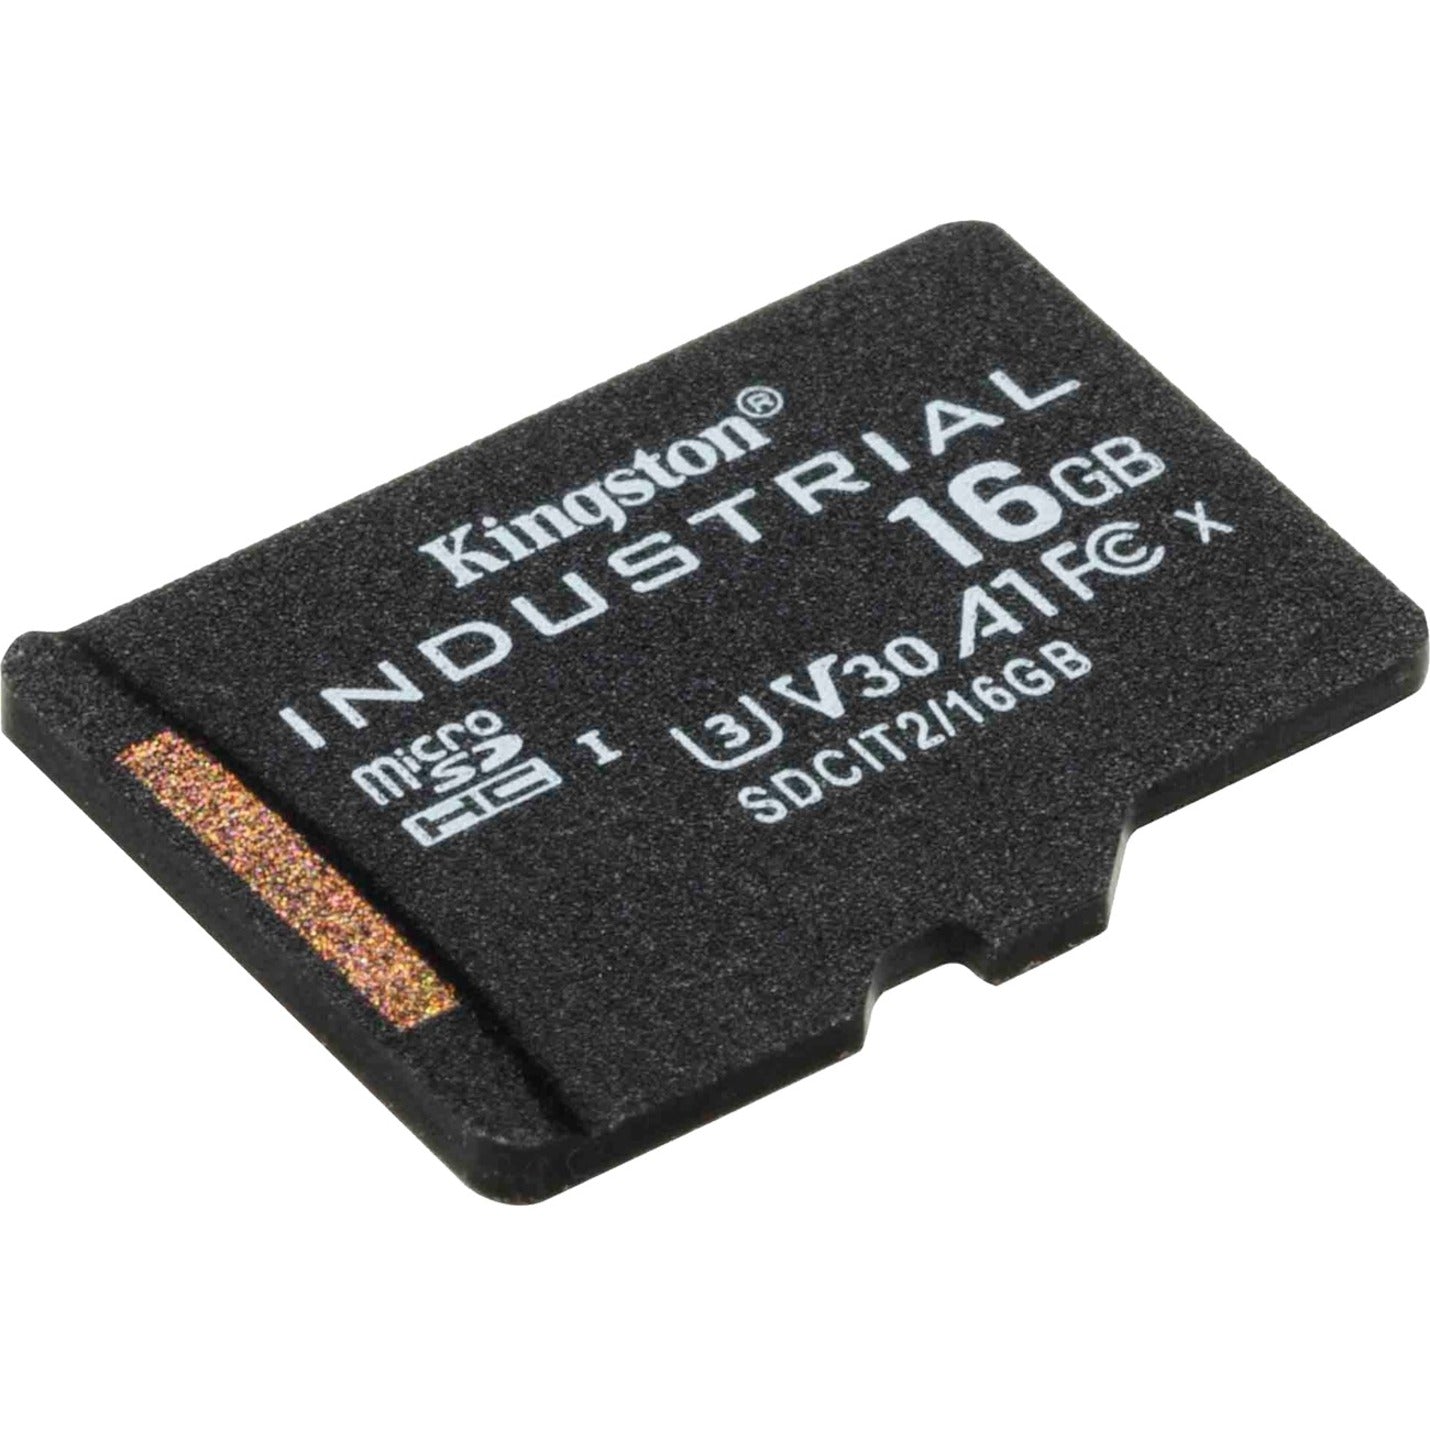 Kingston SDCIT2/16GBSP Industrial 16GB microSDHC Card, 100 MB/s Data Transfer Rate, V30 Video Speed Class